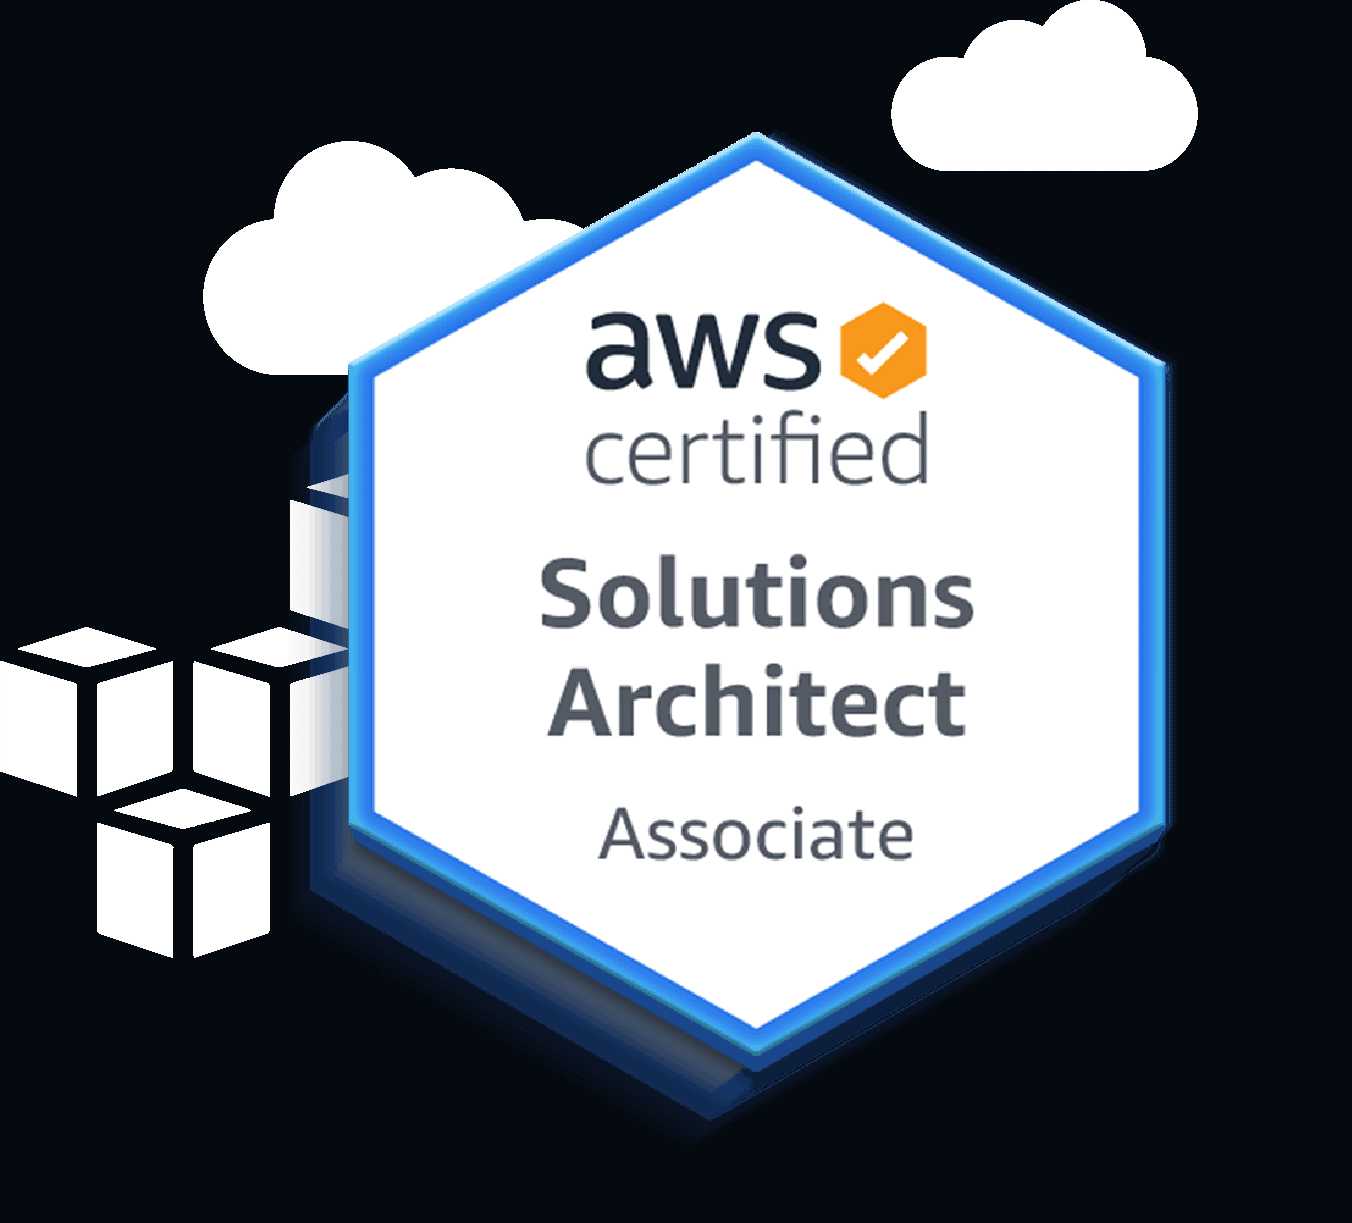 AWS Certified Solutions Architect (Associate) Training course and certification